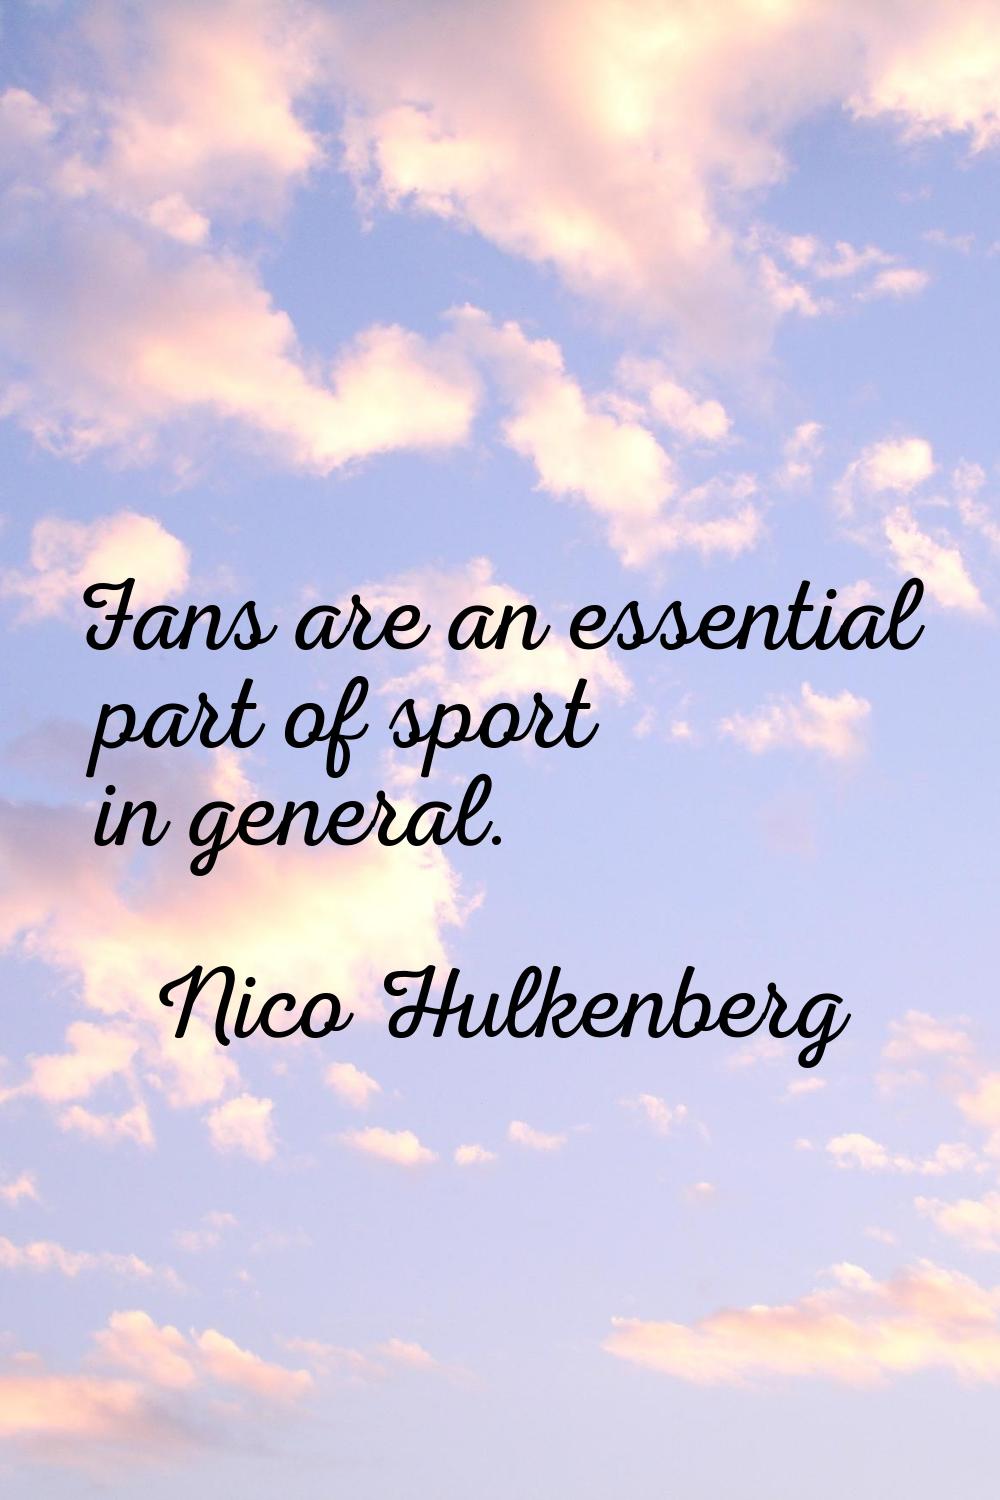 Fans are an essential part of sport in general.